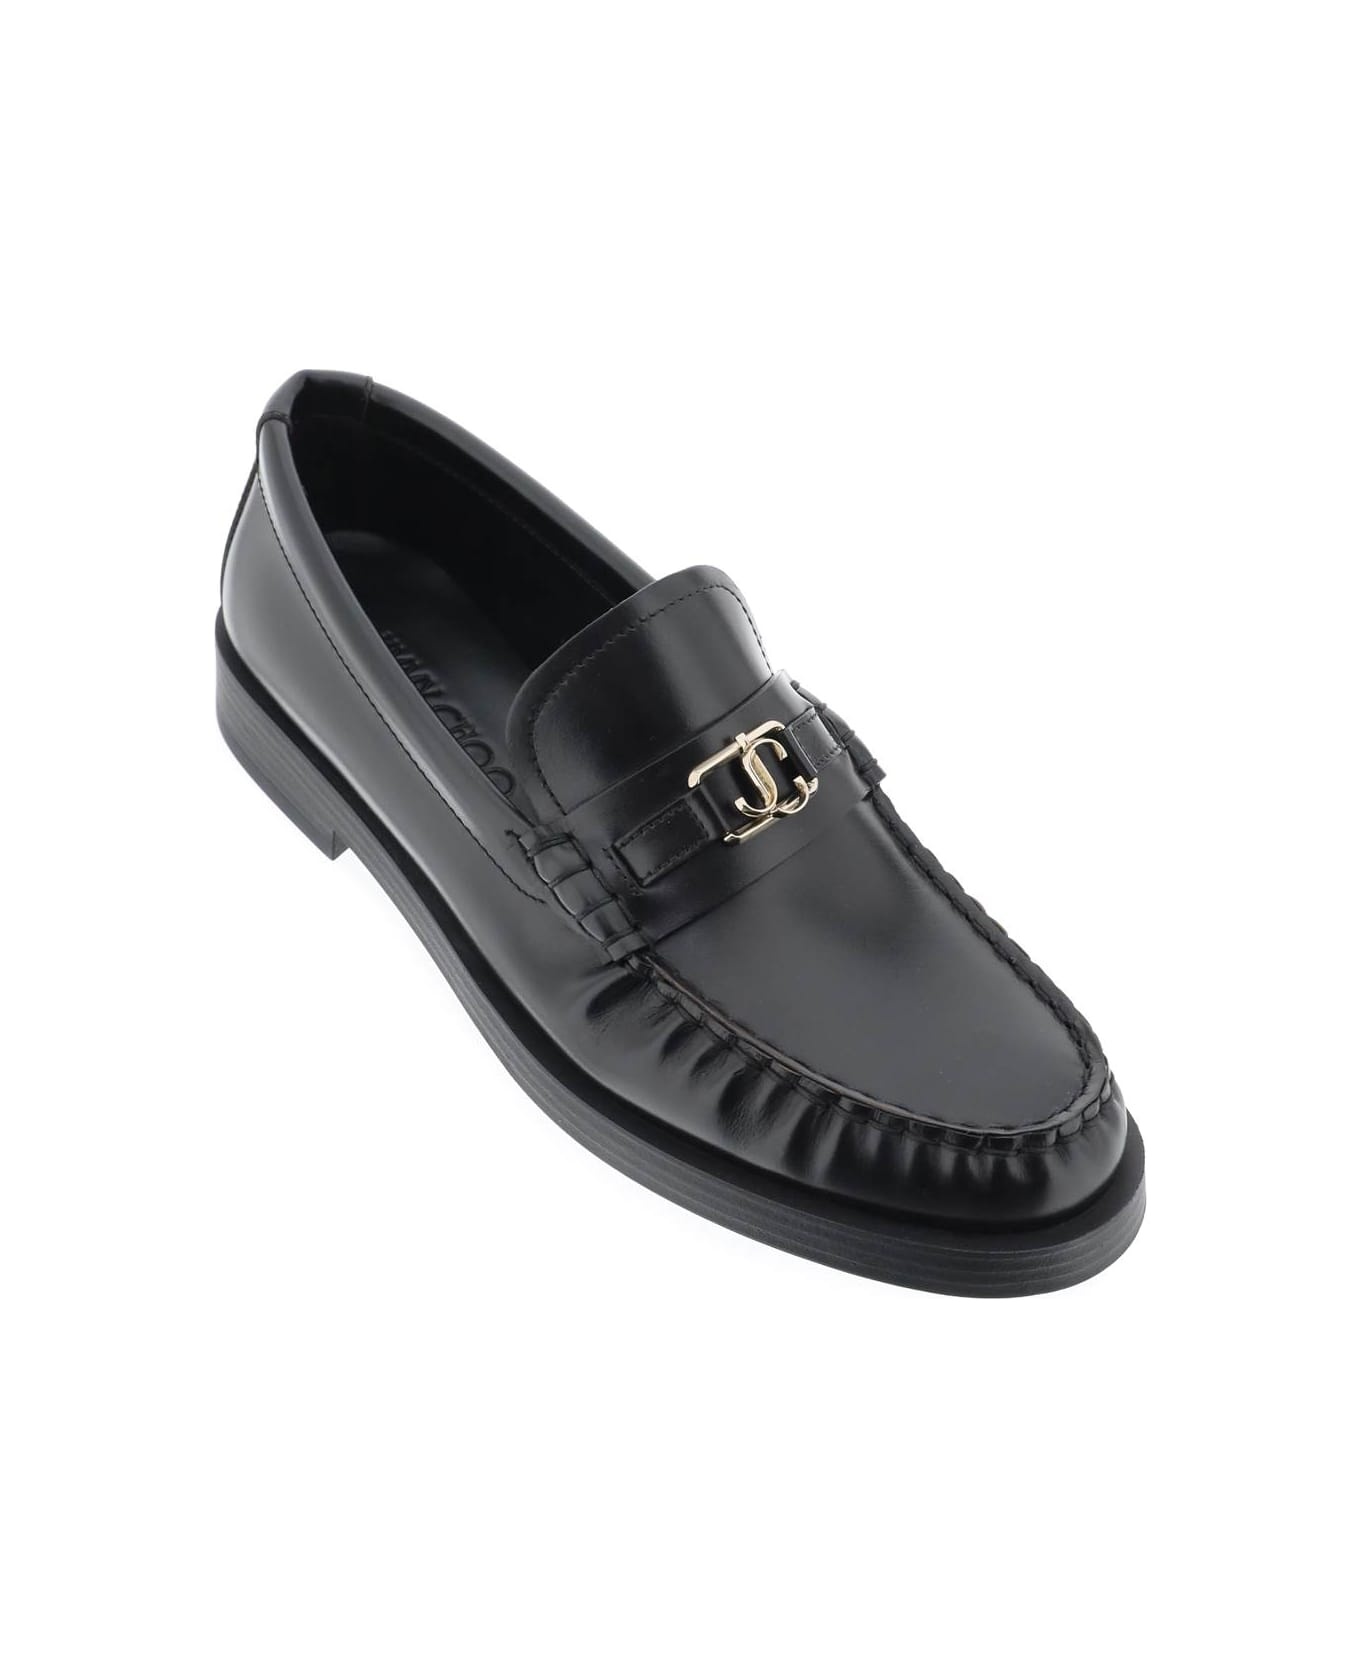 Addie Loafers - 4